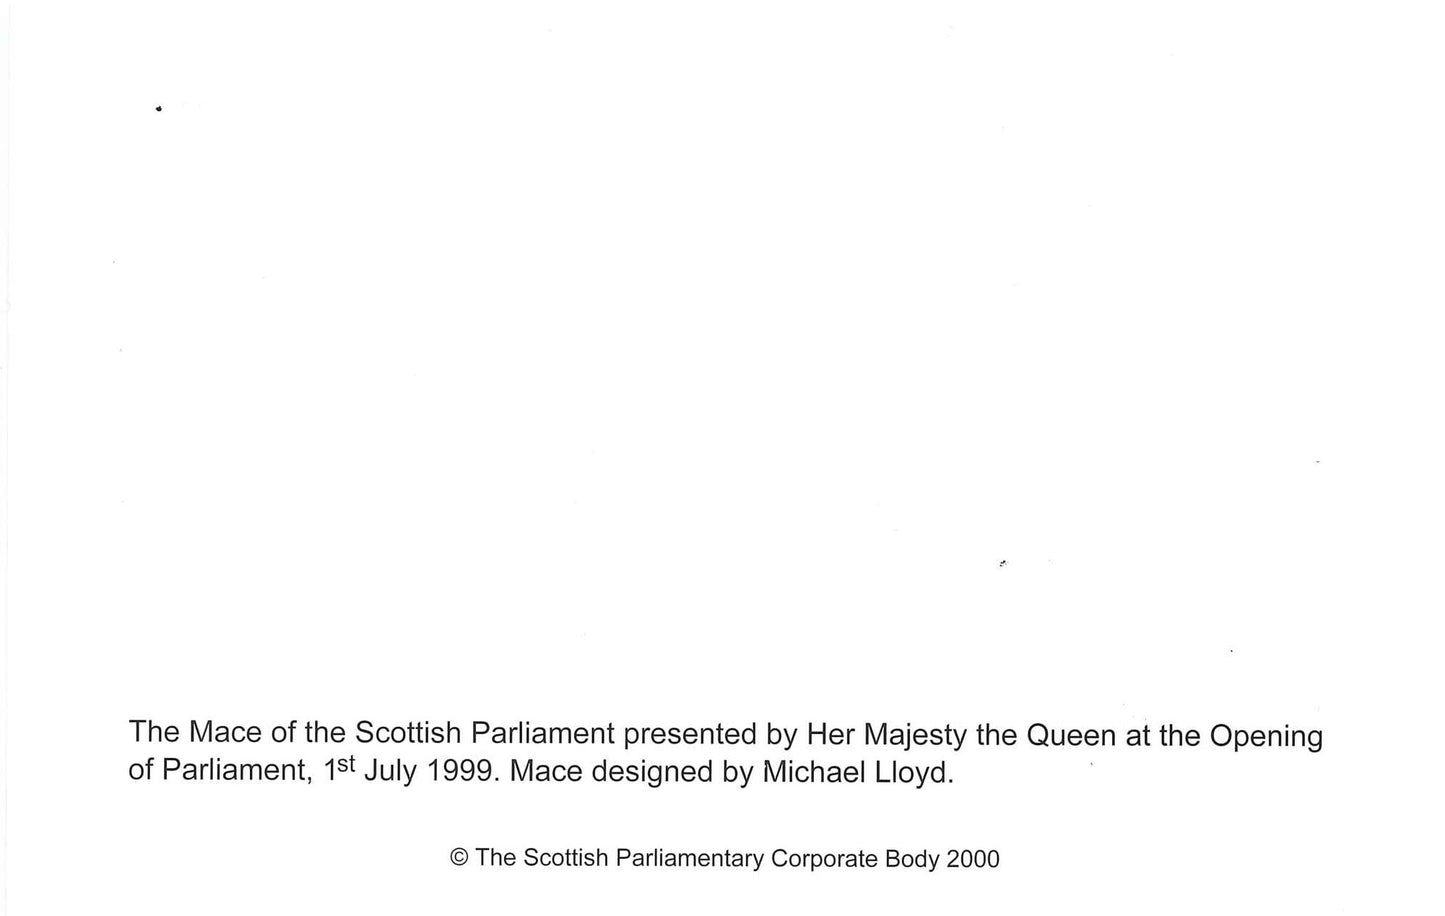 Back of the card. White with description: The Mace of the Scottish Parliament presented by Her Majesty the Queen at the Opening of Parliament, 1st July 1999. Mace designed by Michael Lloyd. 